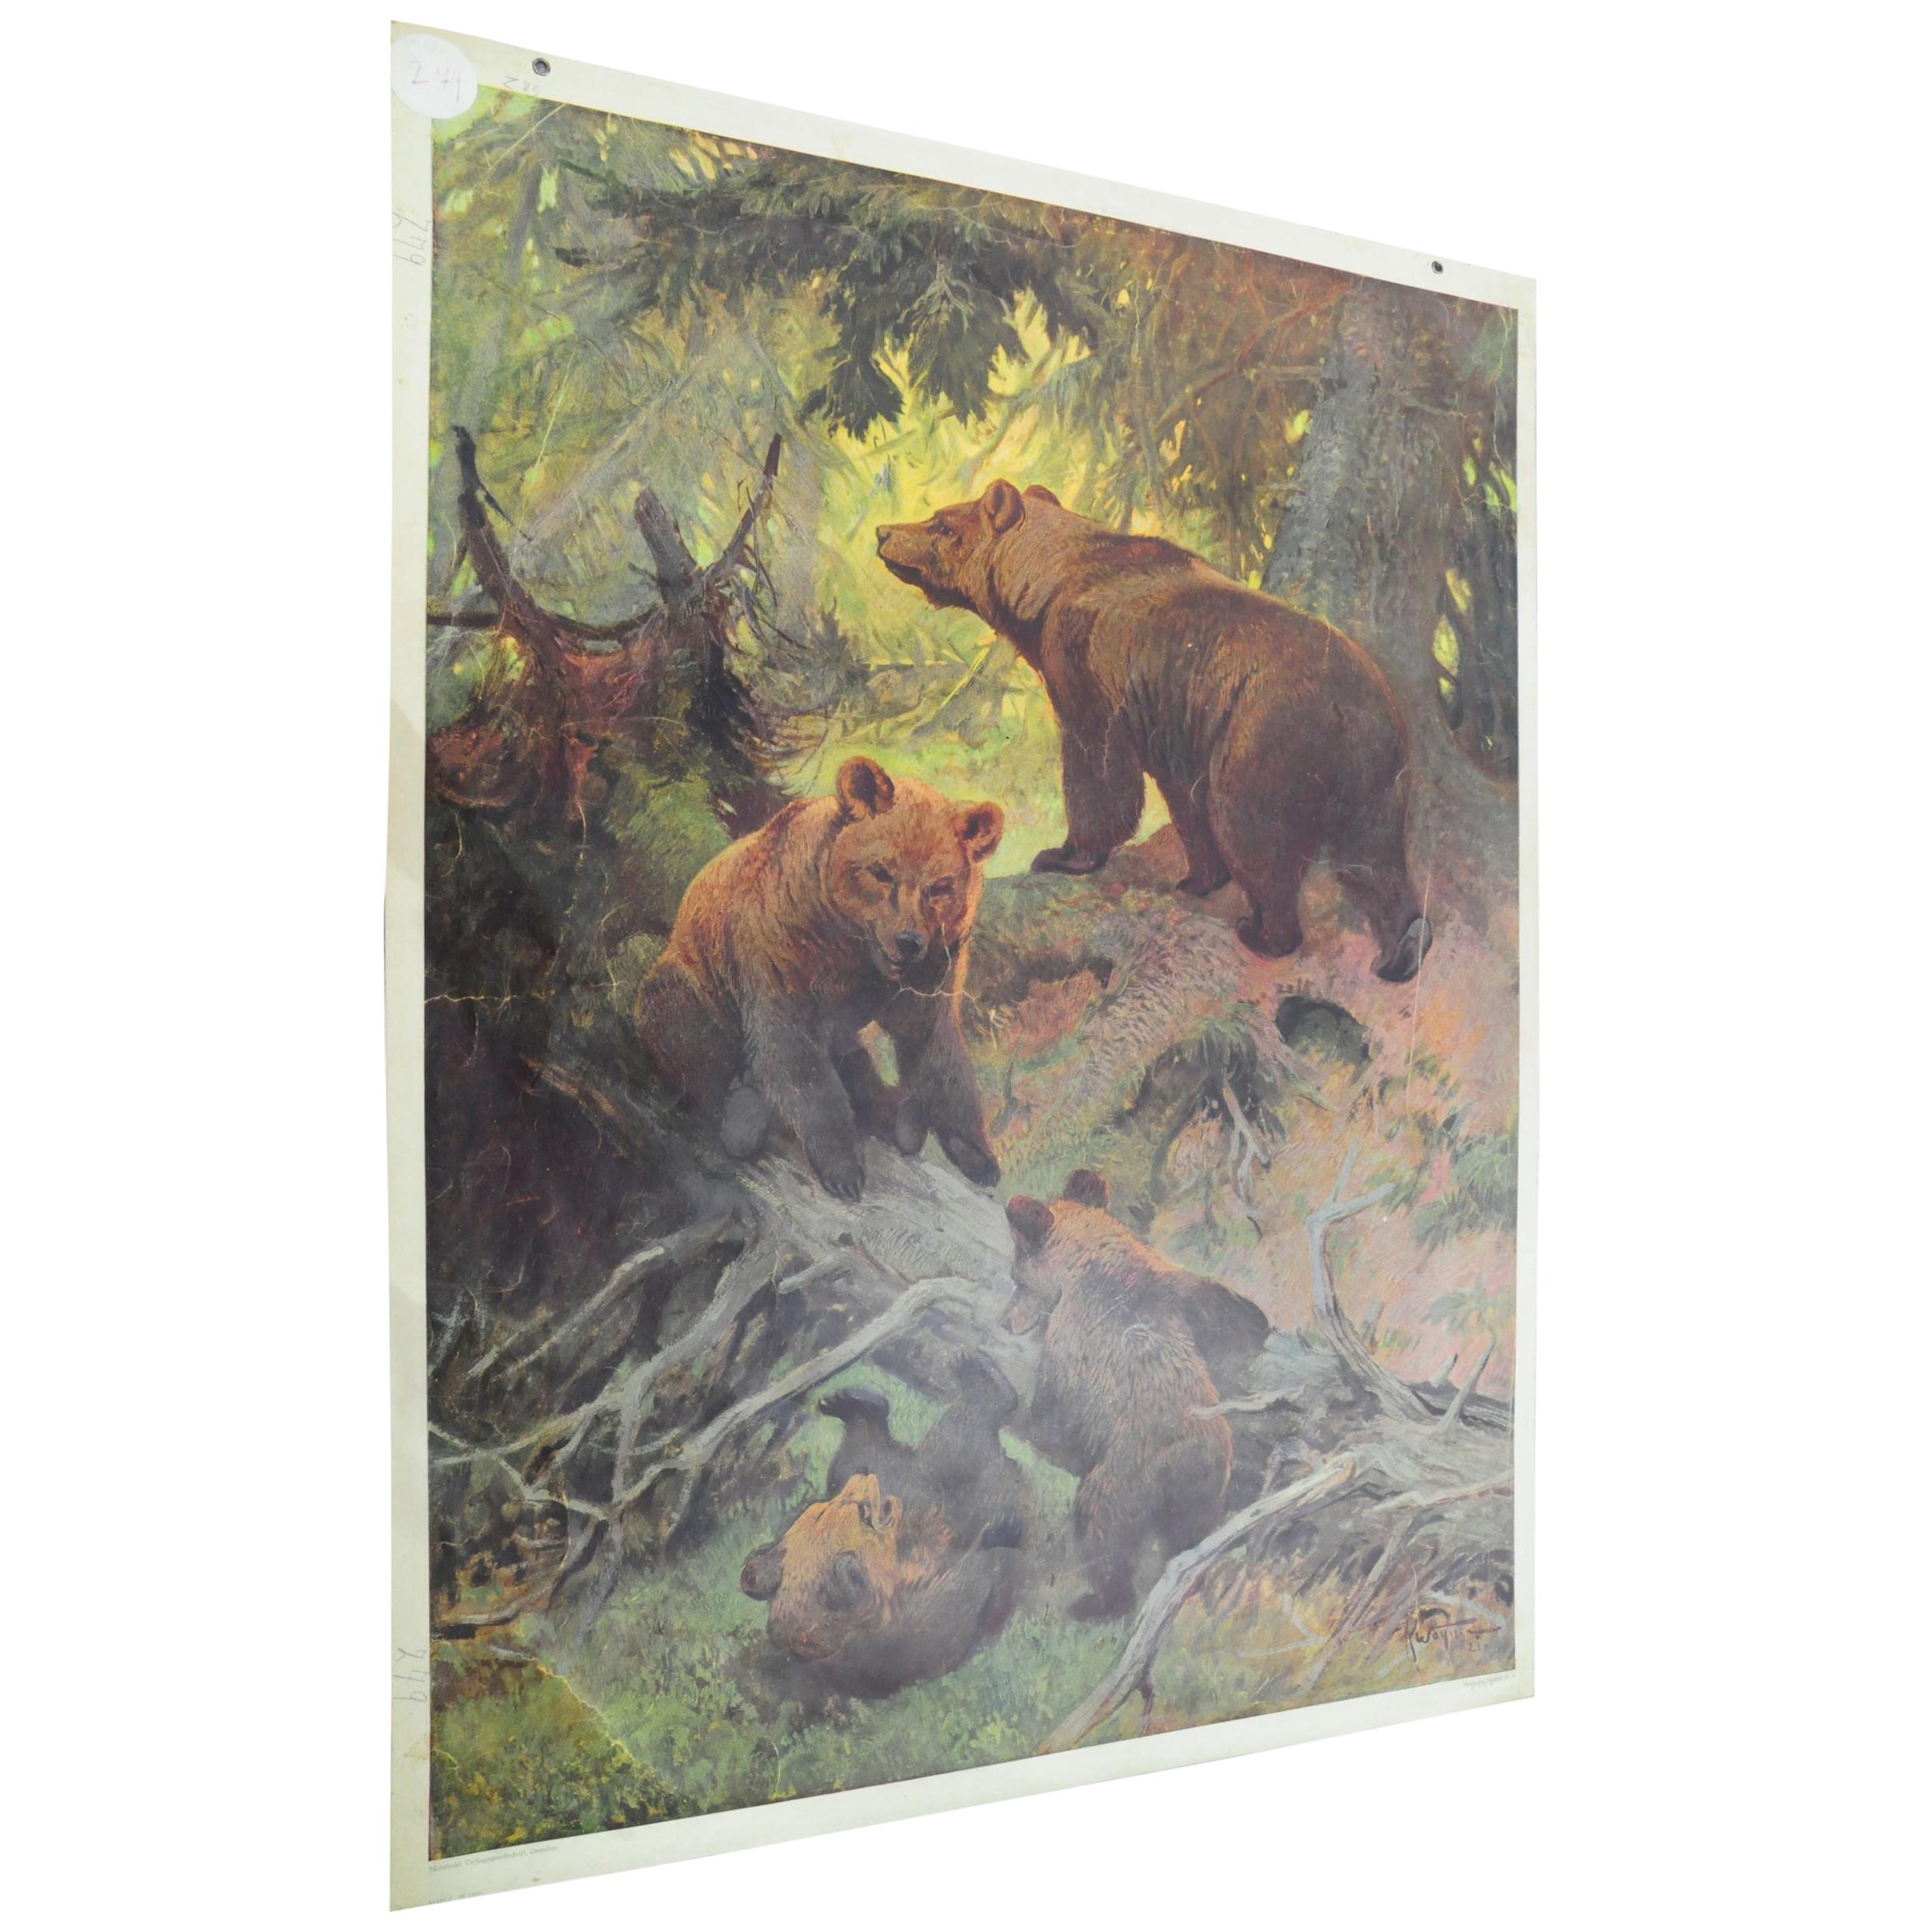 Countrycore Mural Vintage Cottagecore Printed Wall Chart Family of Brown Bears For Sale